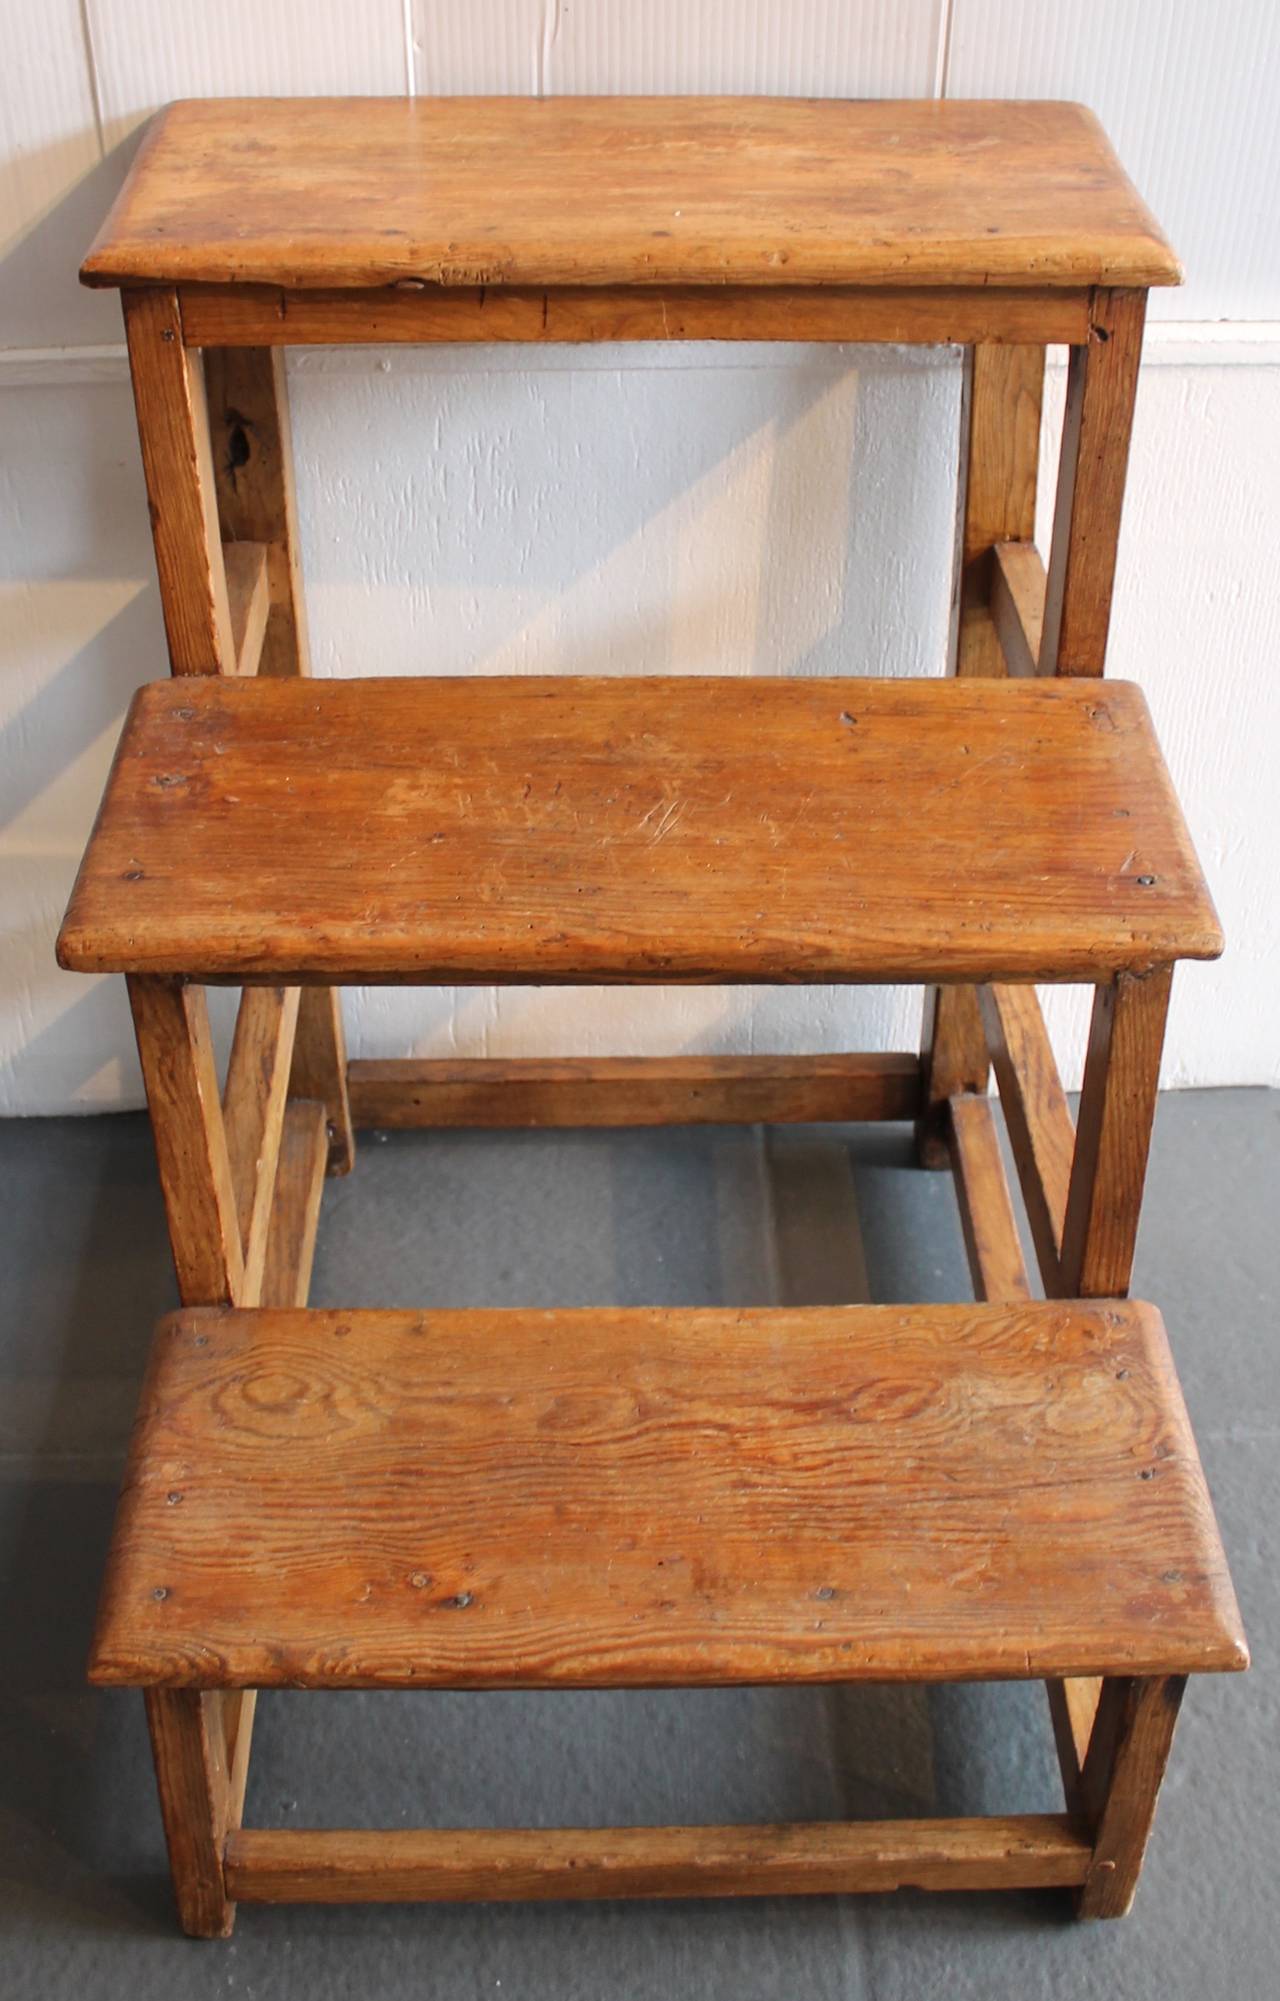 These early steps are in great as found condition with square nail and wood peg construction. They are strong and sturdy too. These steps are great for display or as stair steps. Wonderful worn patina.